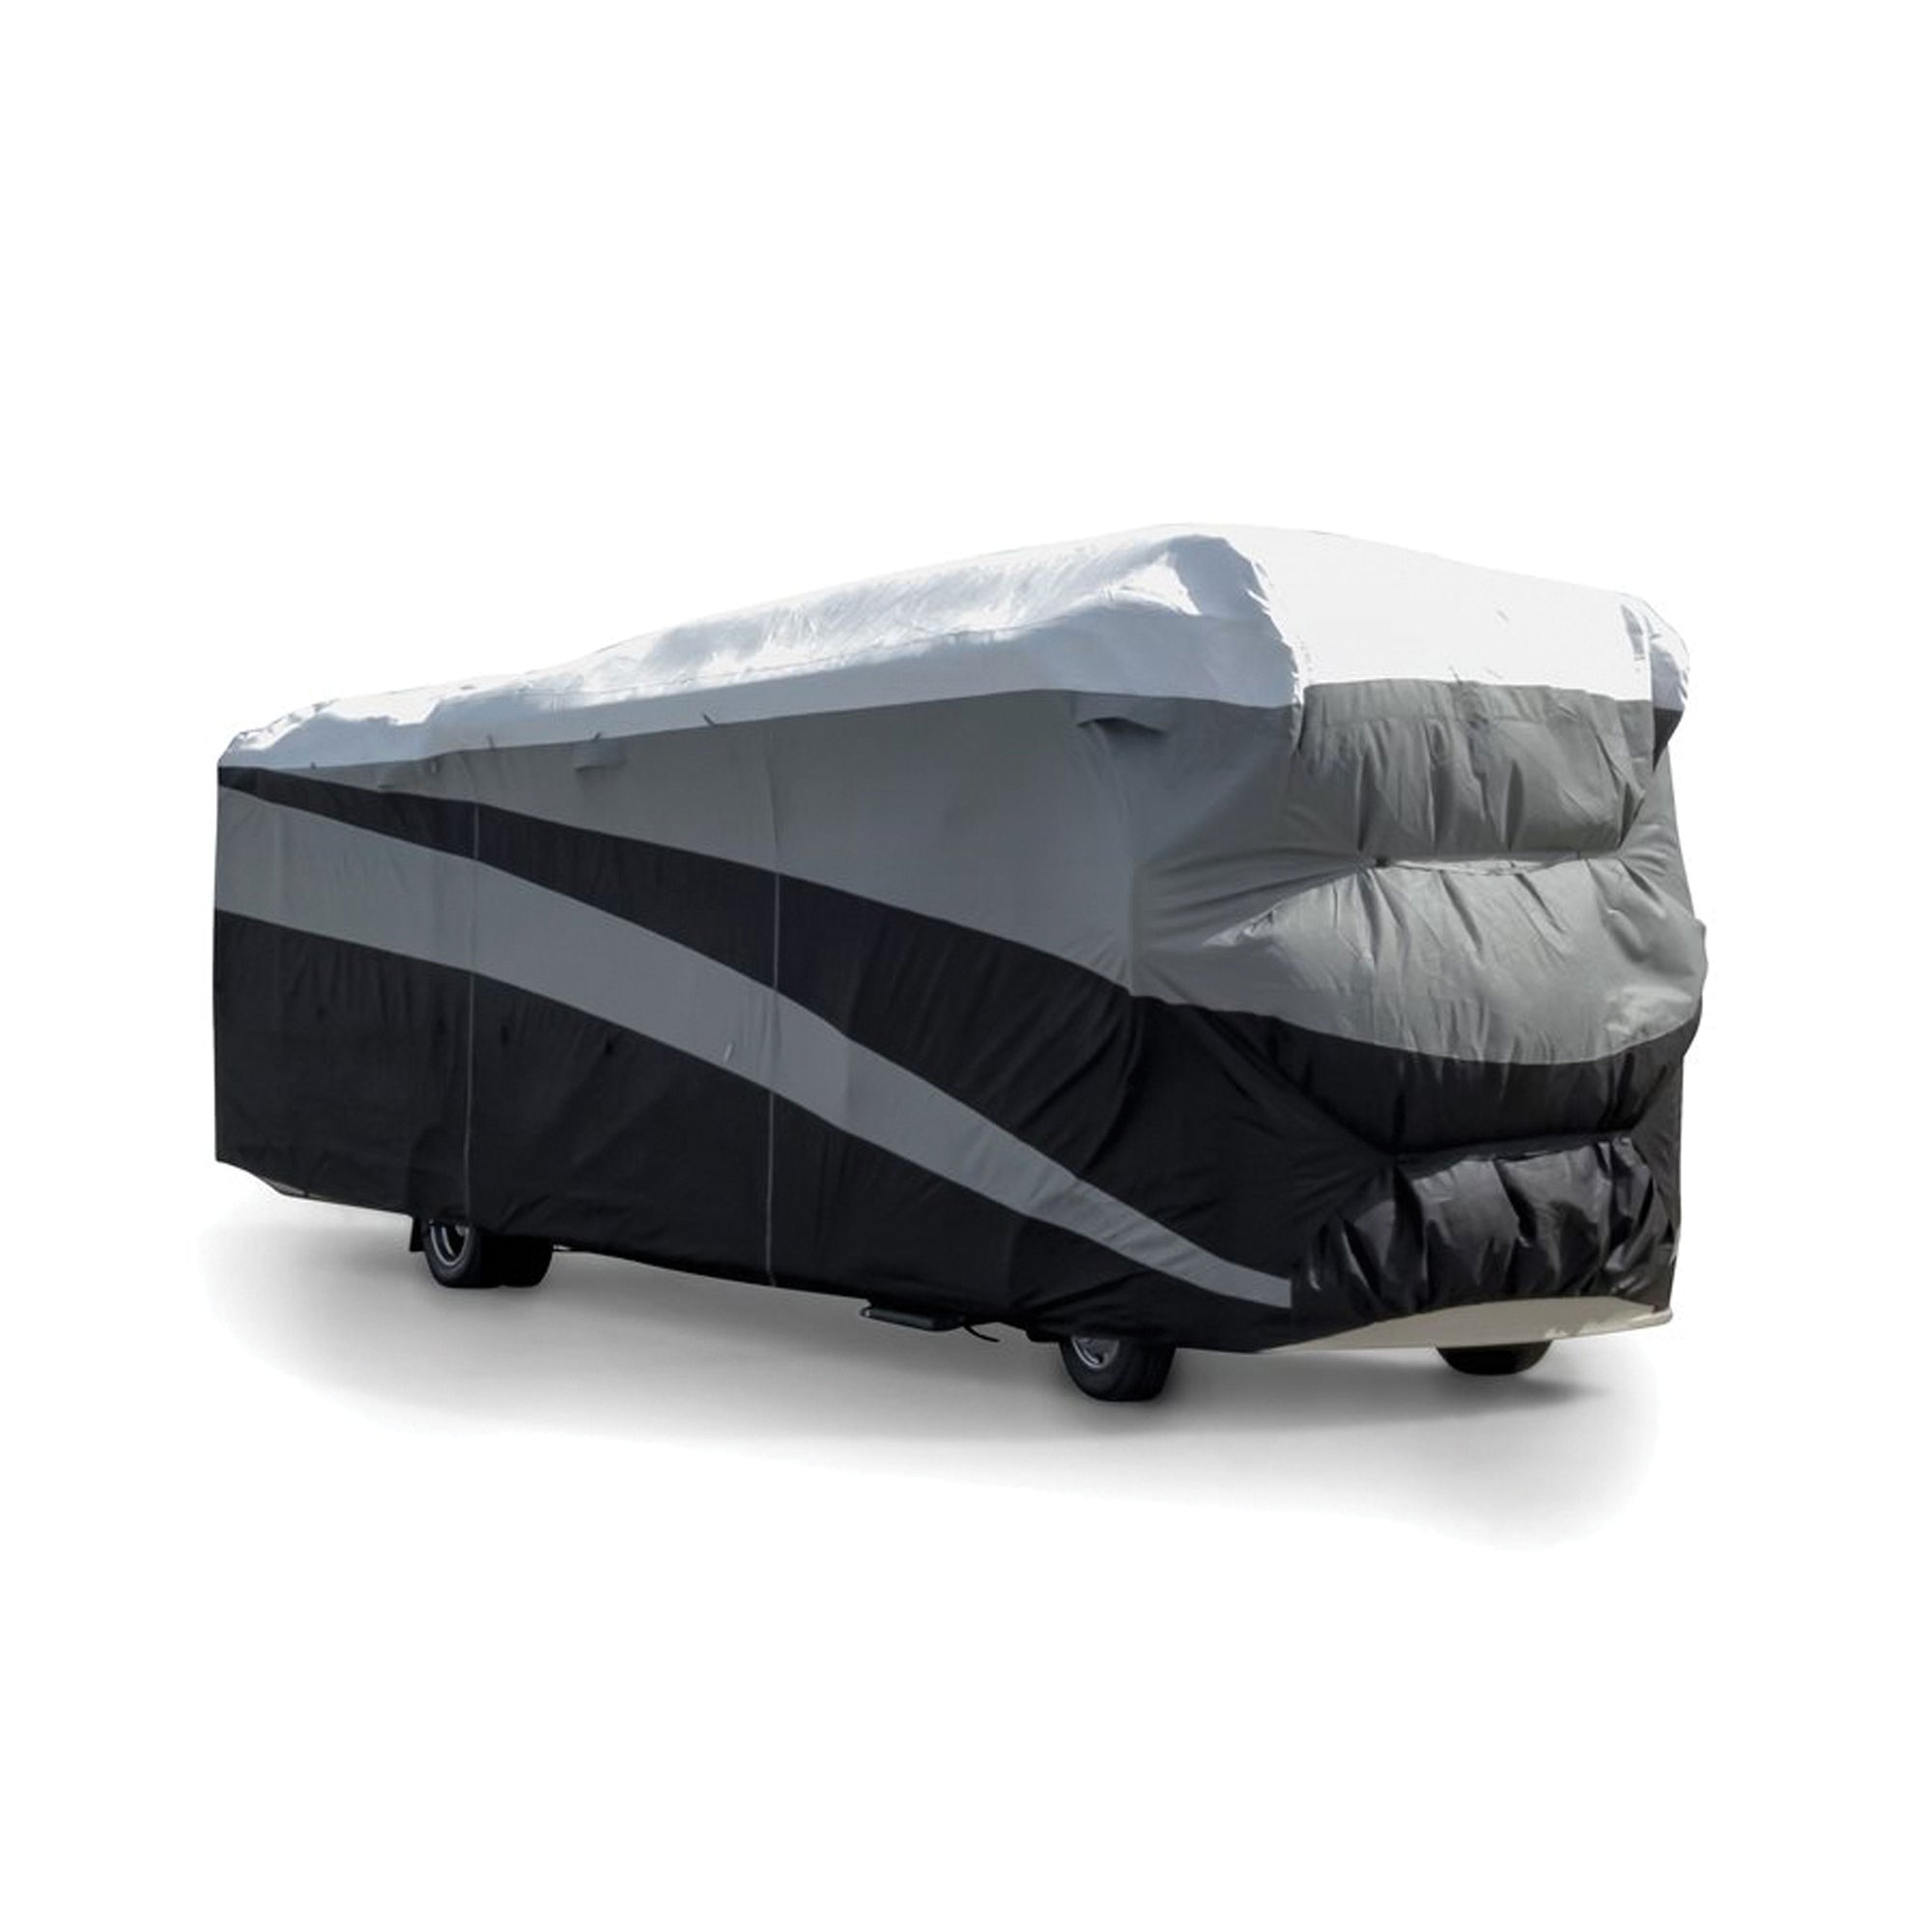 Camco 56300 RV Cover Class A to 28' Pro-Tec